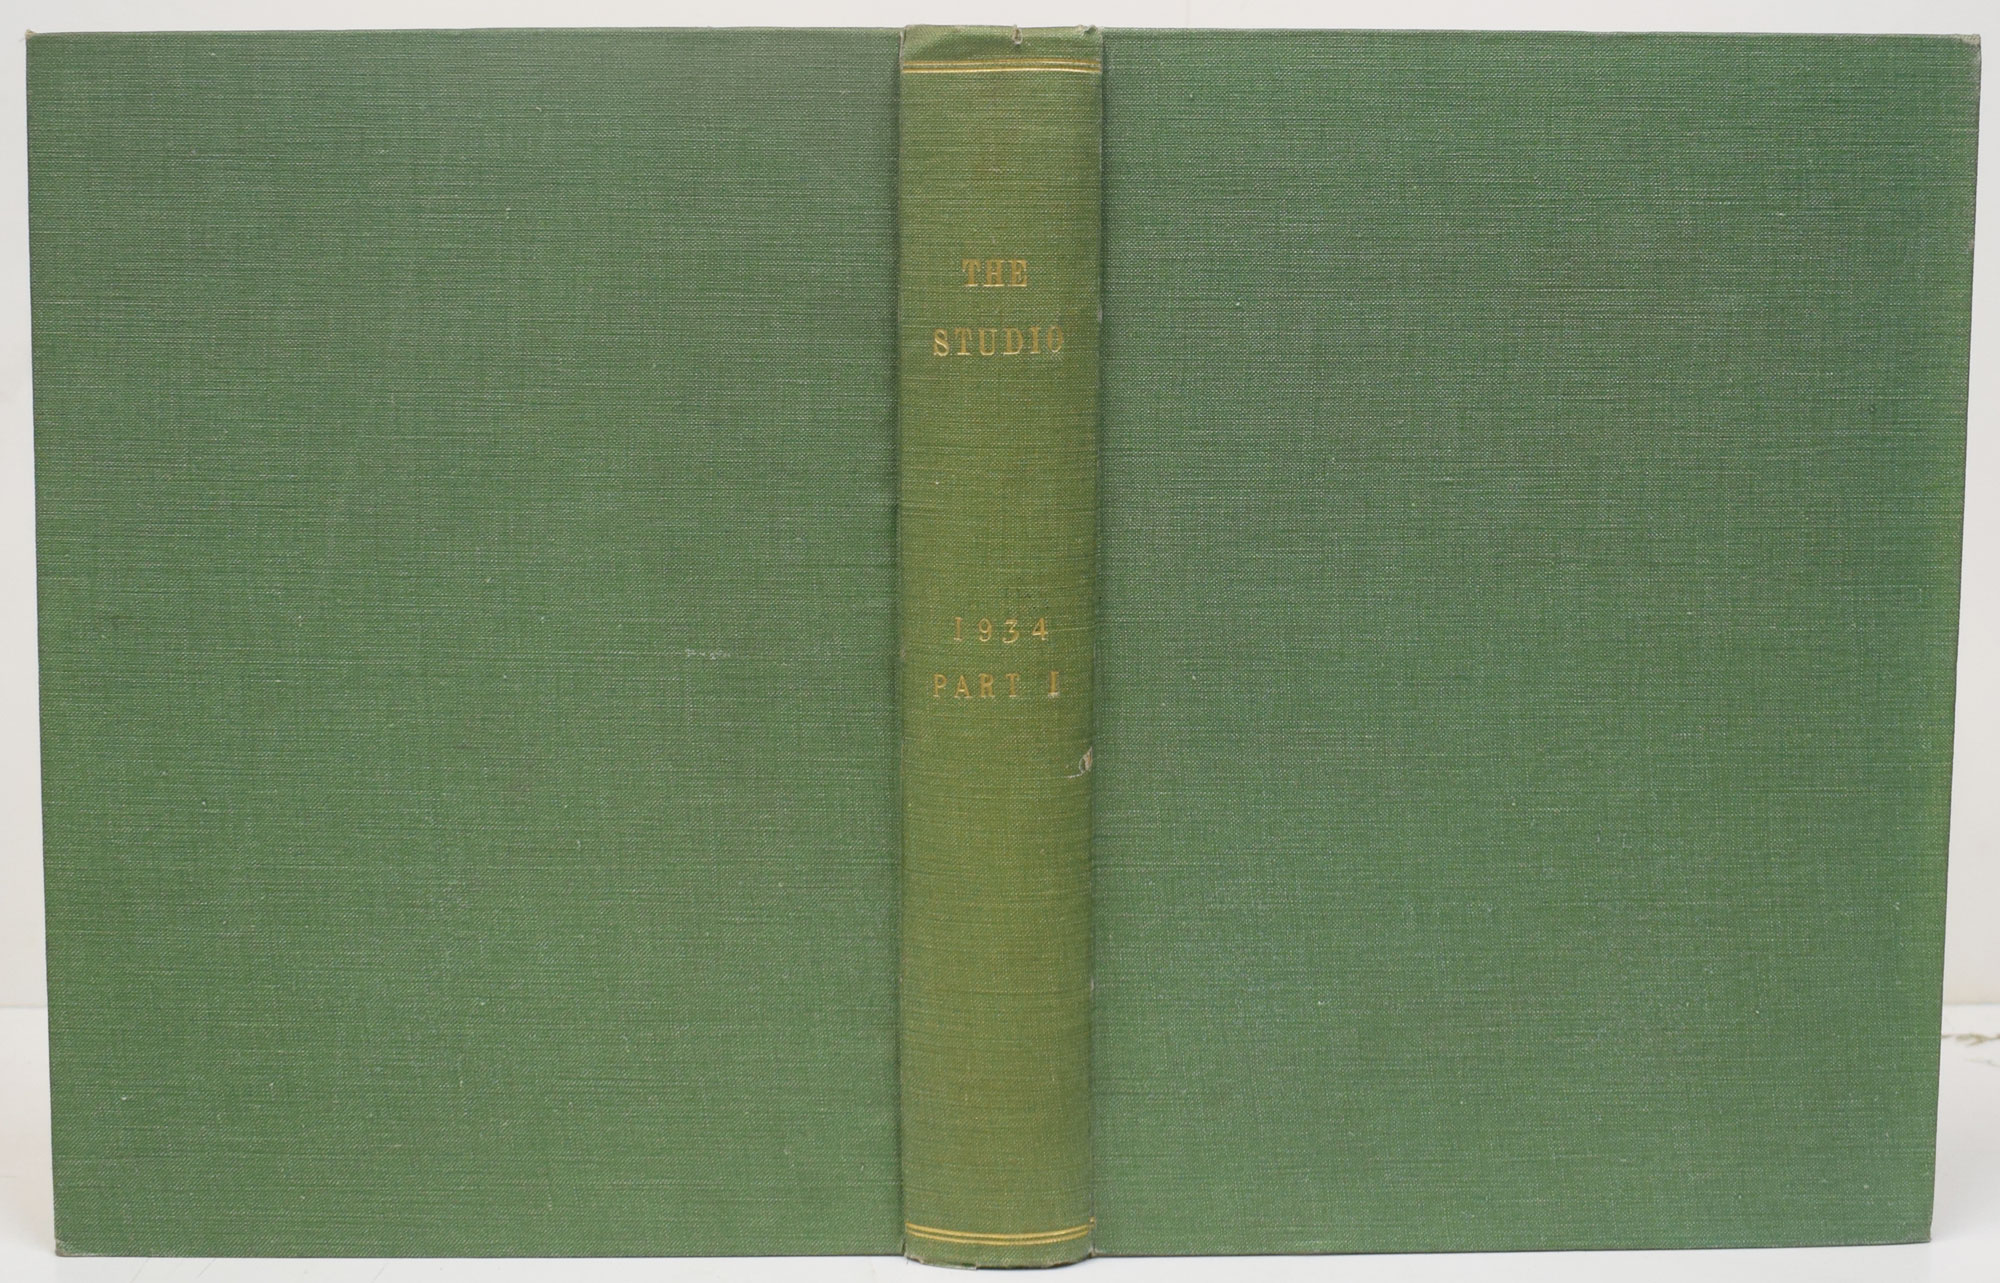 HOLME, C GEOFFREY [ED.] - The Studio: An Illustrated Magazine of Fine and Applied Art. Volume 107. January-June 1934